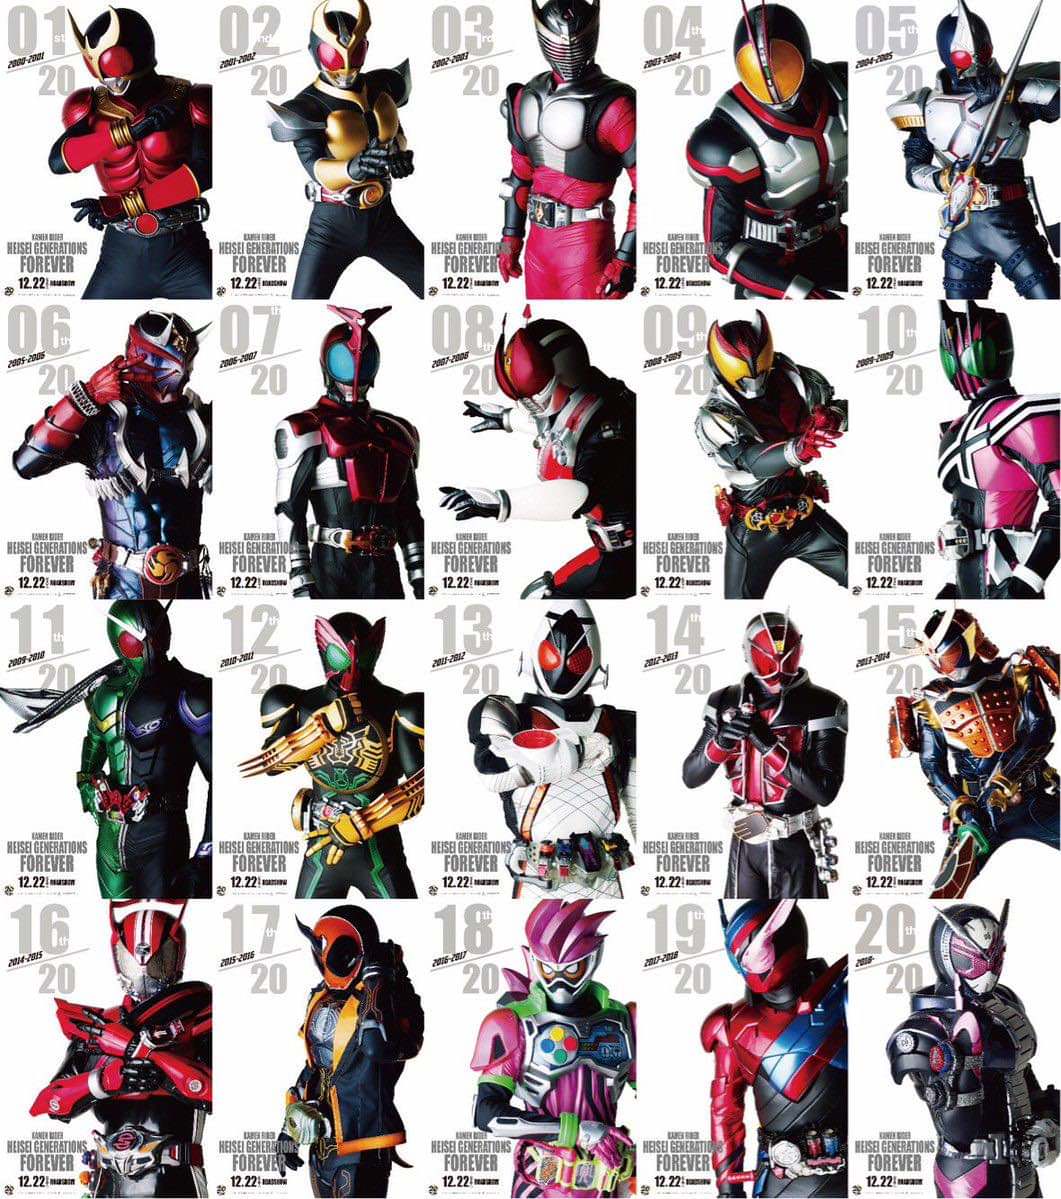 News Promotional posters for Heisei Generations Forever